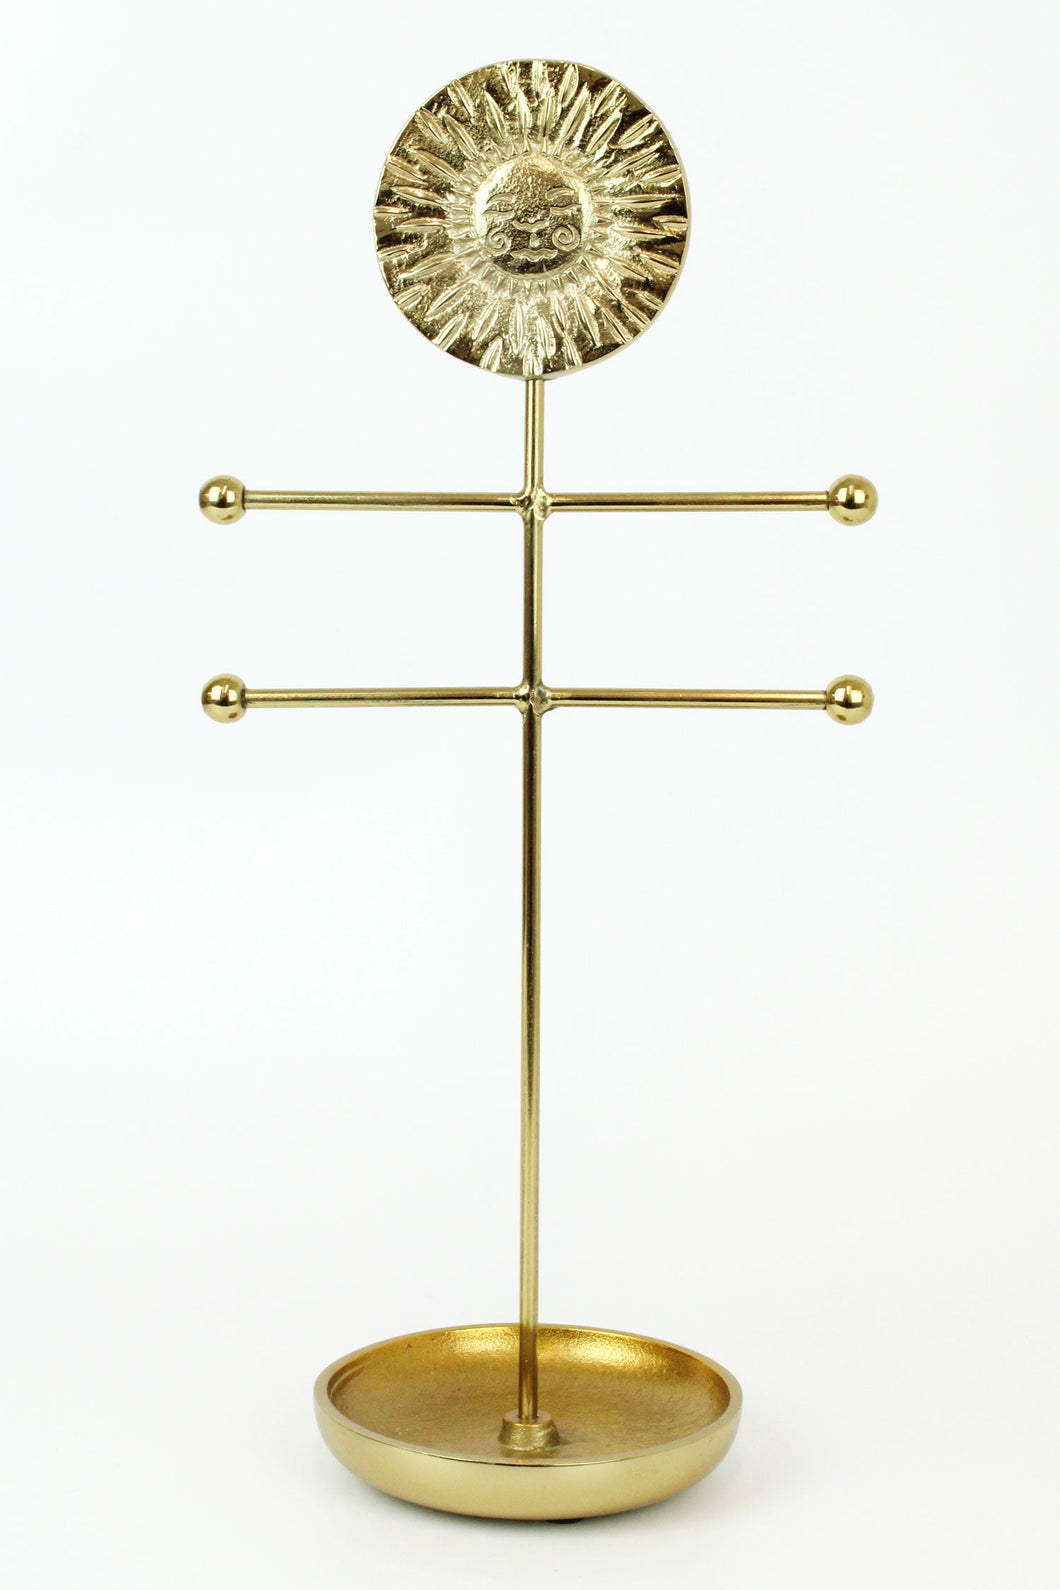 Heavy brass jewellery stand with a sun face and a ring dish at the base